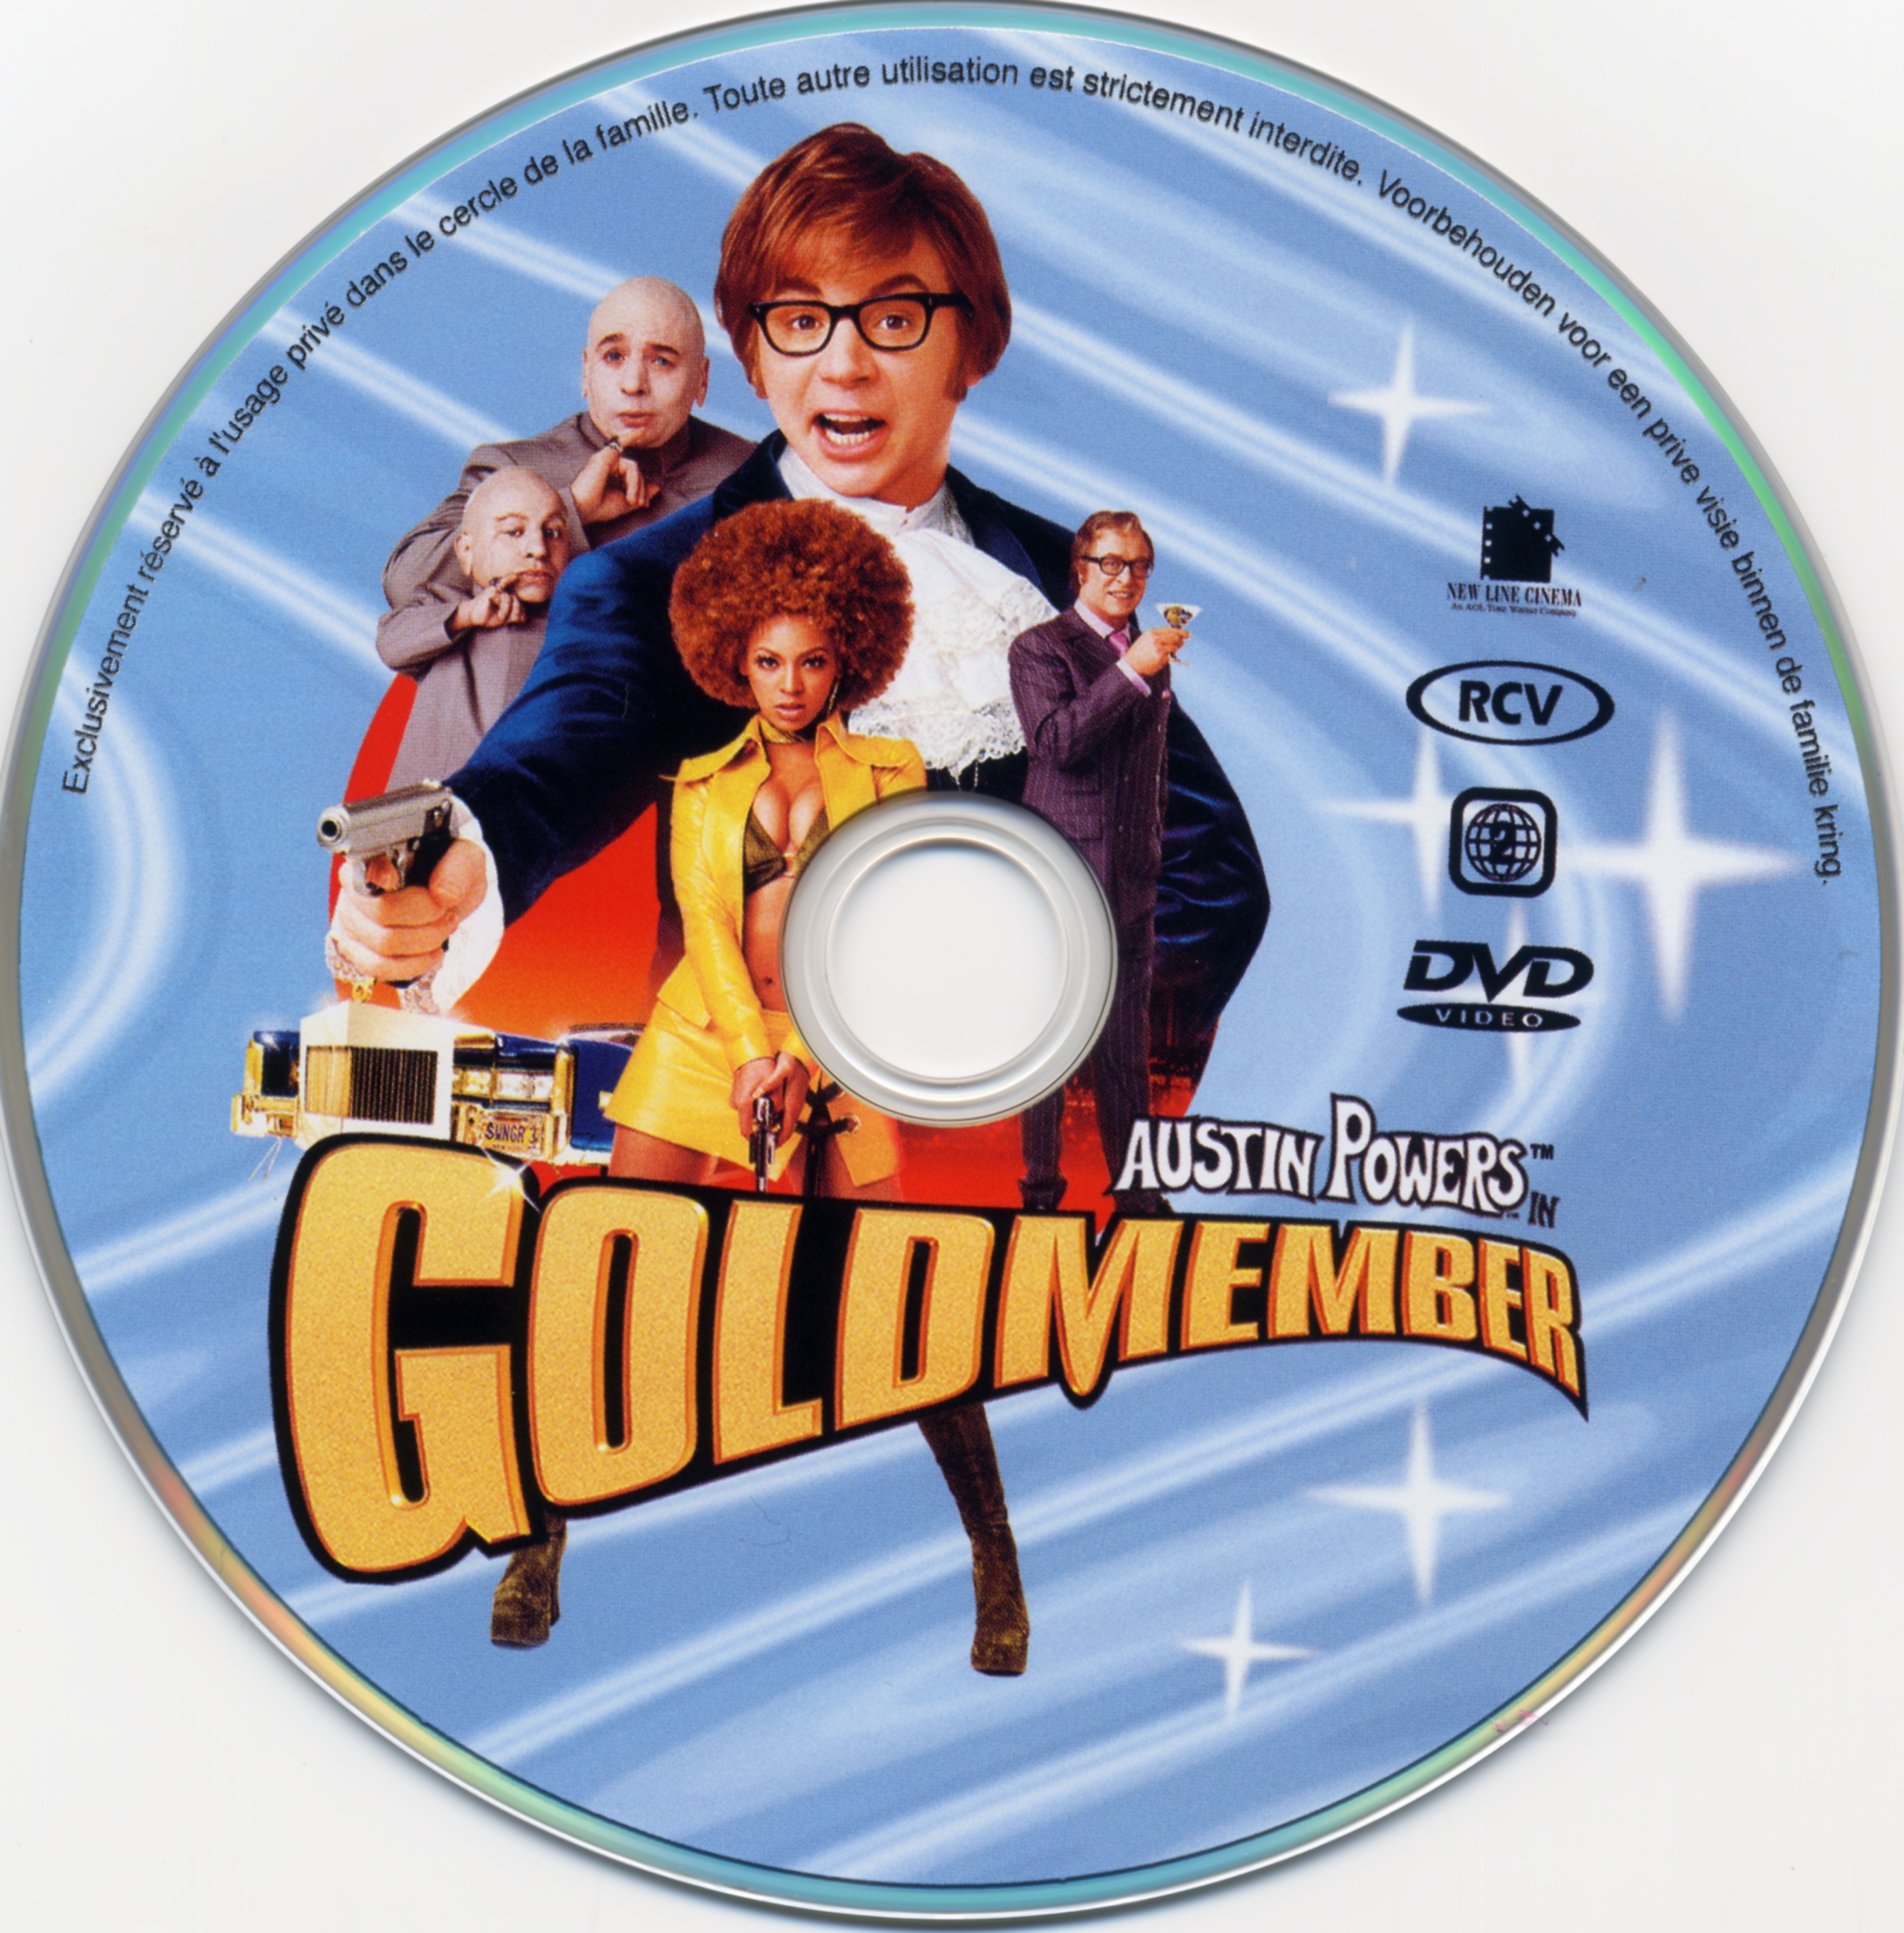 Austin Powers in goldmember